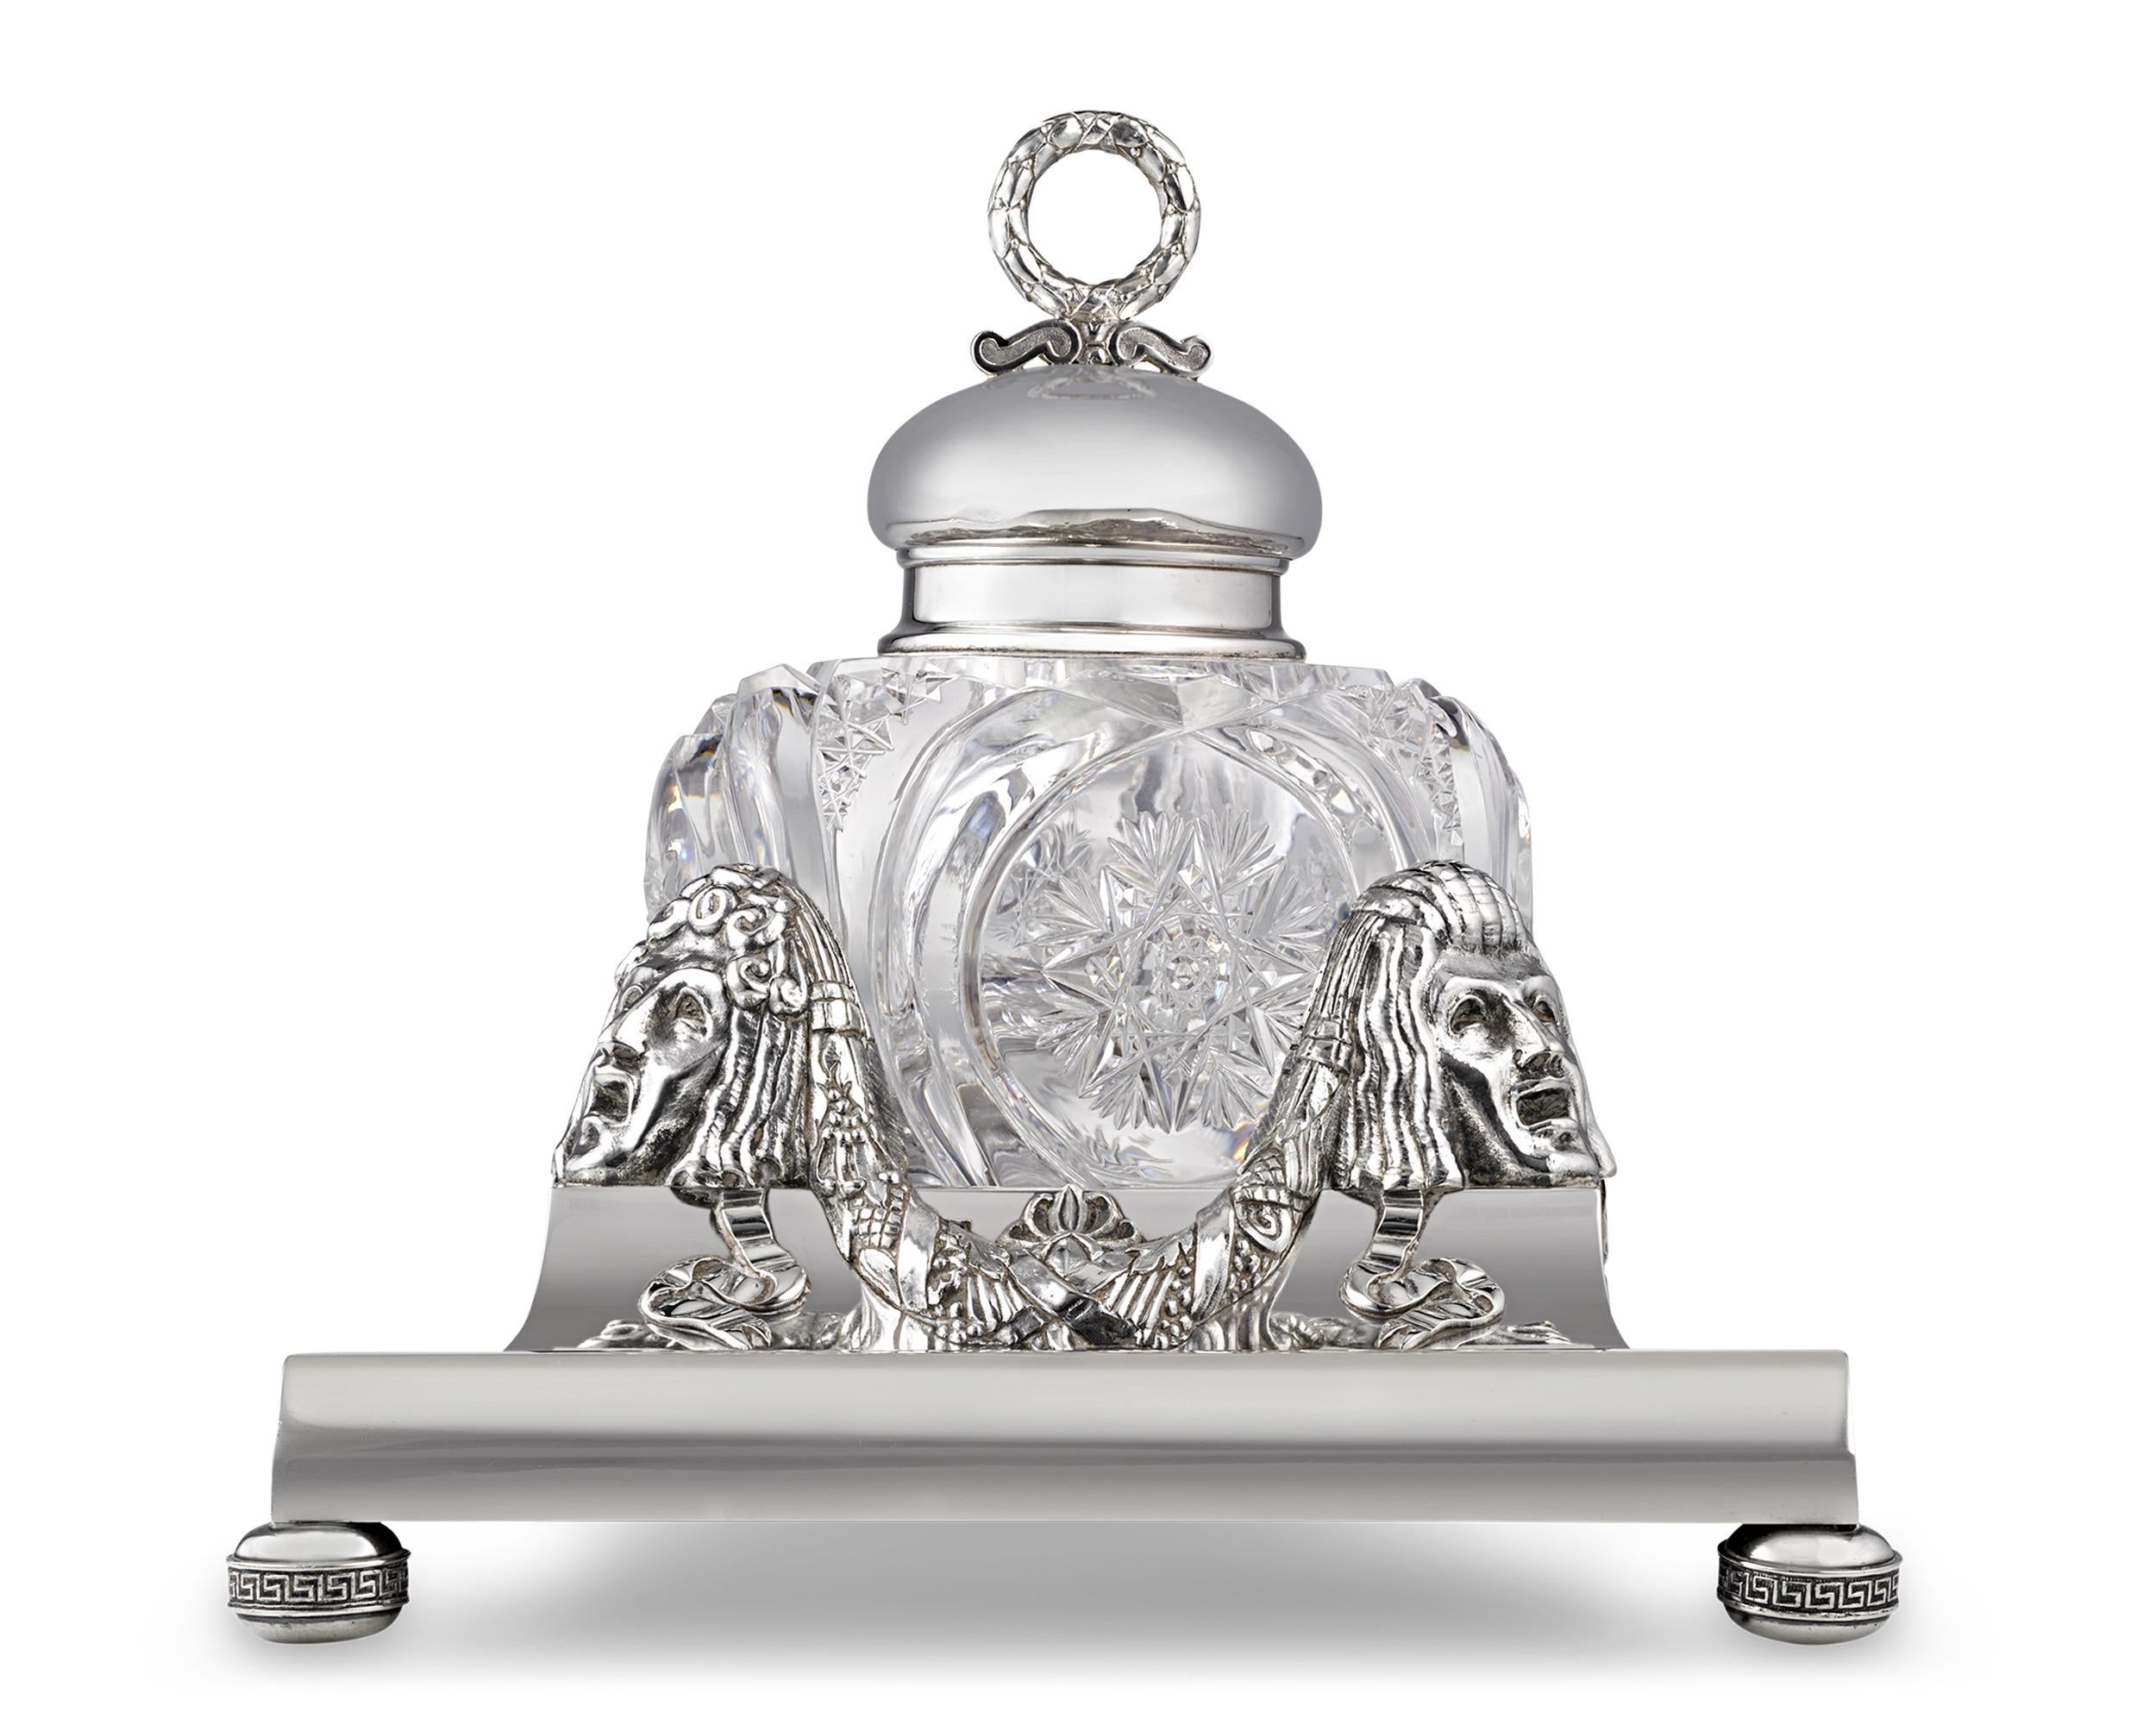 This exquisite inkwell by the legendary Fabergé exudes a bygone luxury. Comprised of intricately cut glass in a star pattern, the inkwell rests upon a silver base cast with dramatic masks among foliate festoons and ribbons. Its refined, neoclassical